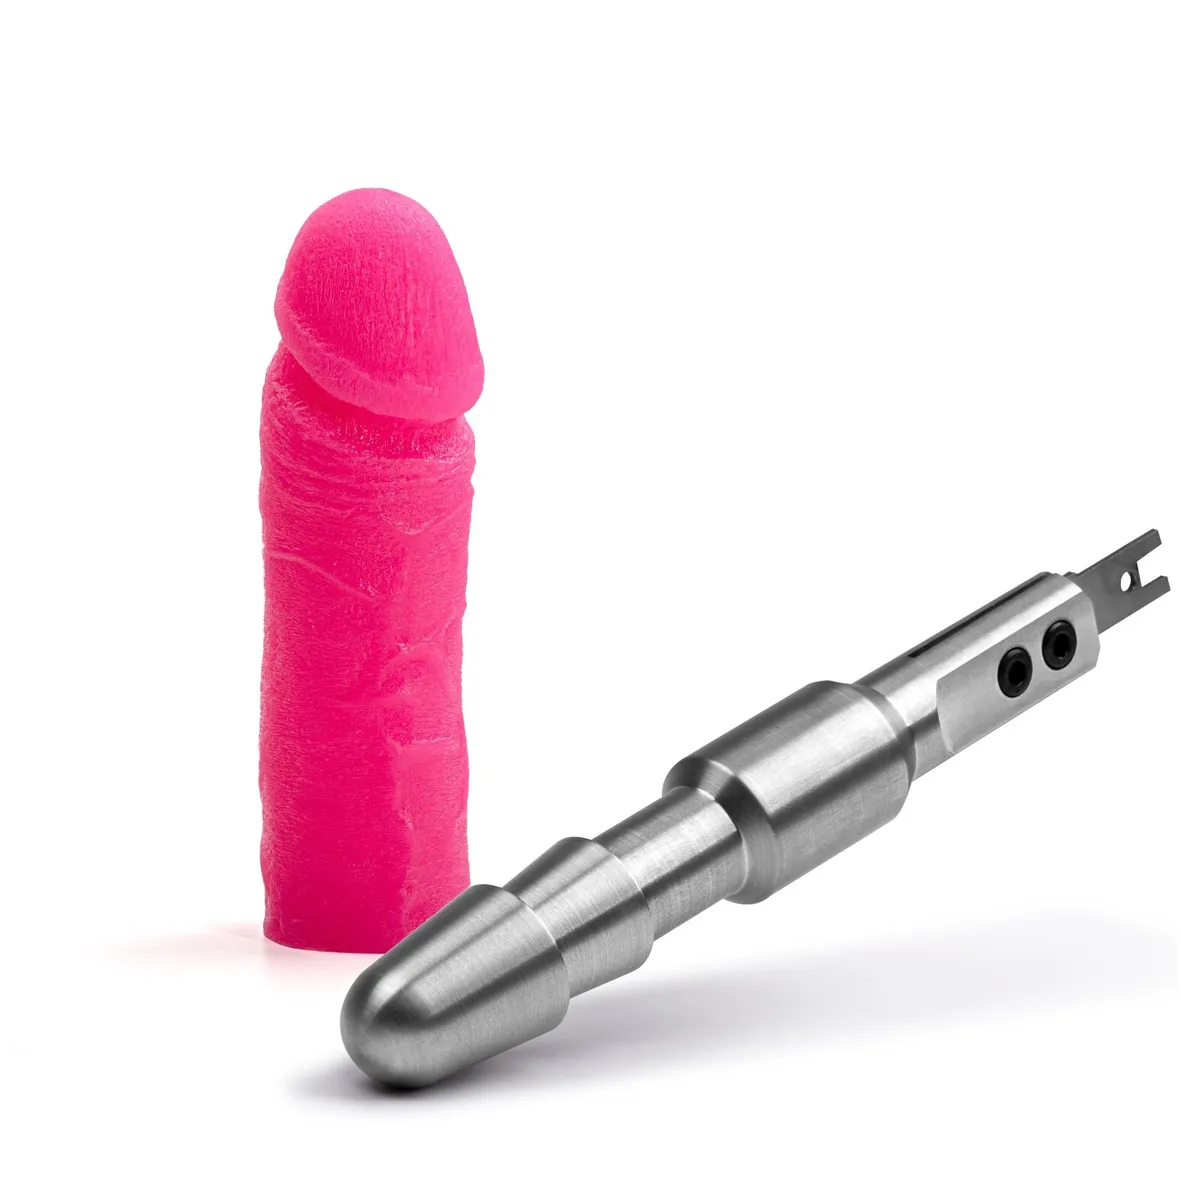 audy madrigal recommends Dildo Attachment For Sawzall